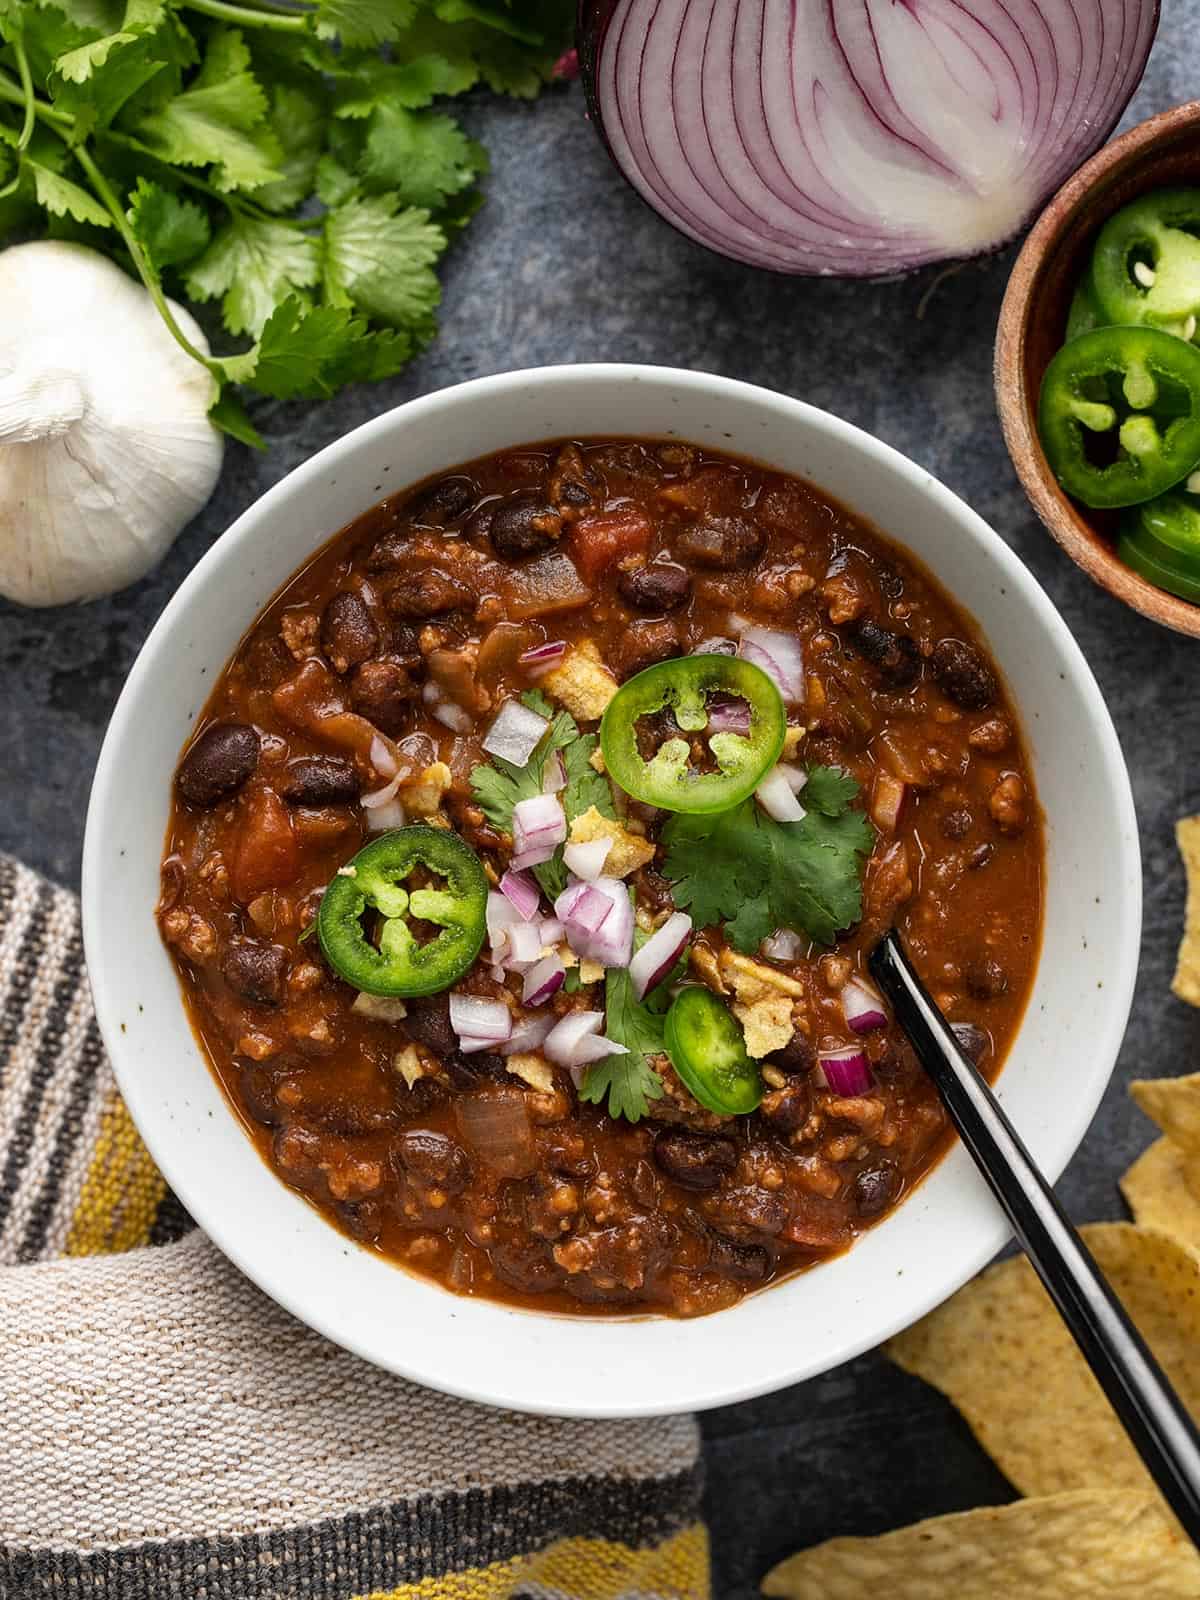 Overhead view of a bowl full of black bean chili with toppings.